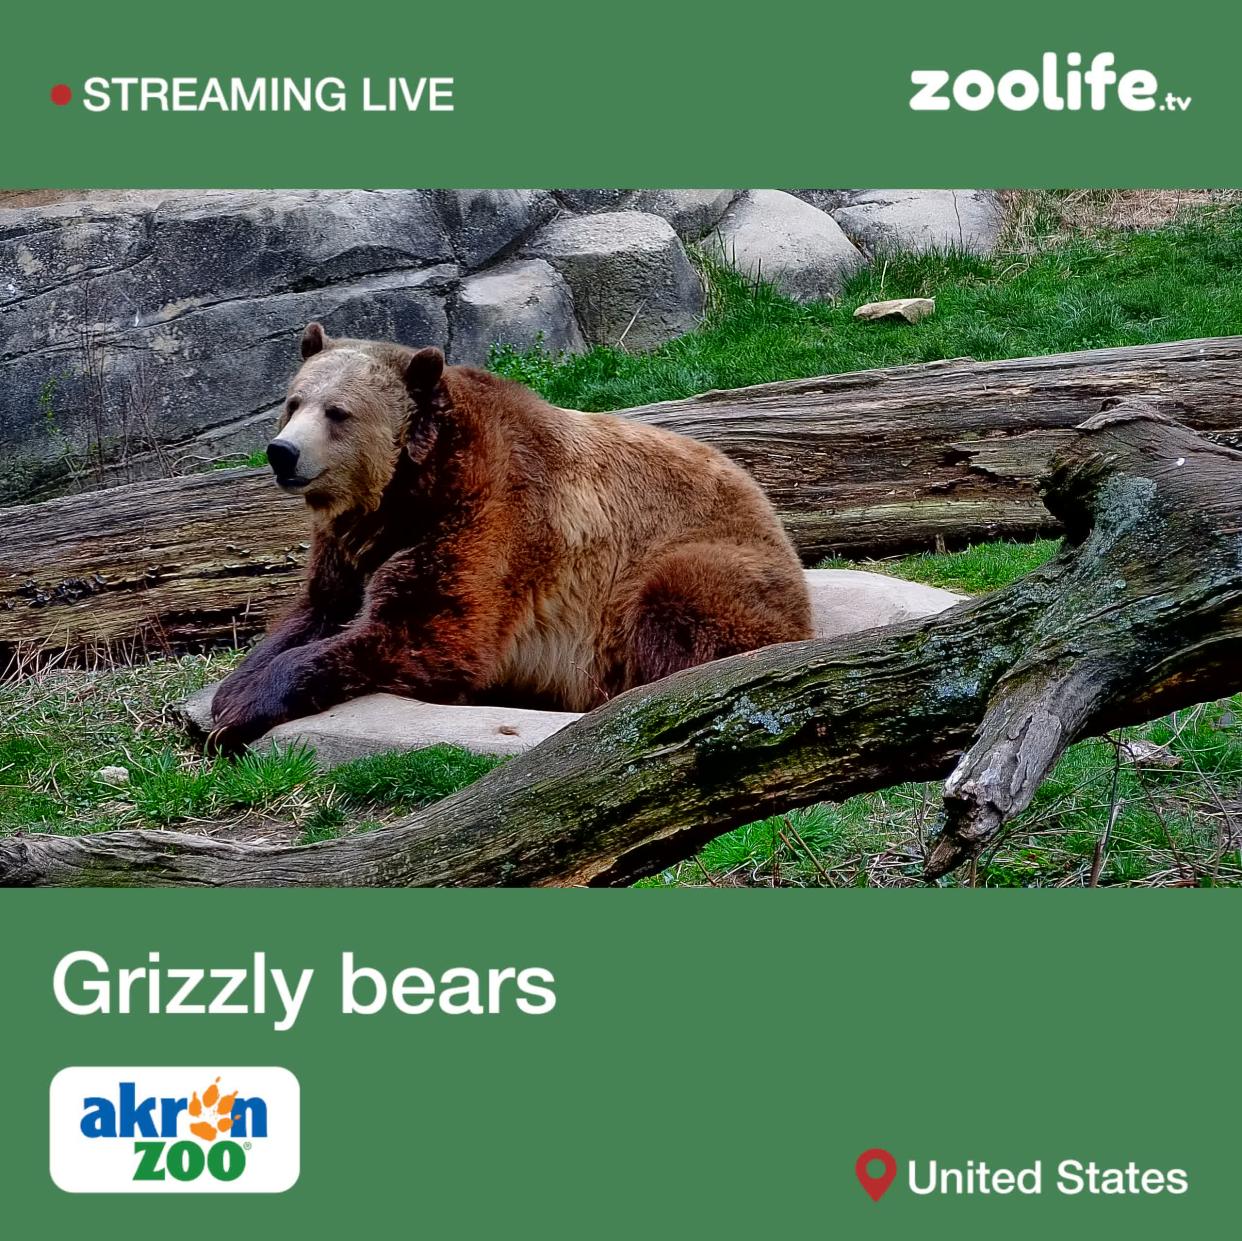 Subscribers to zoolife can watch the Akron Zoo's resident grizzly bears.